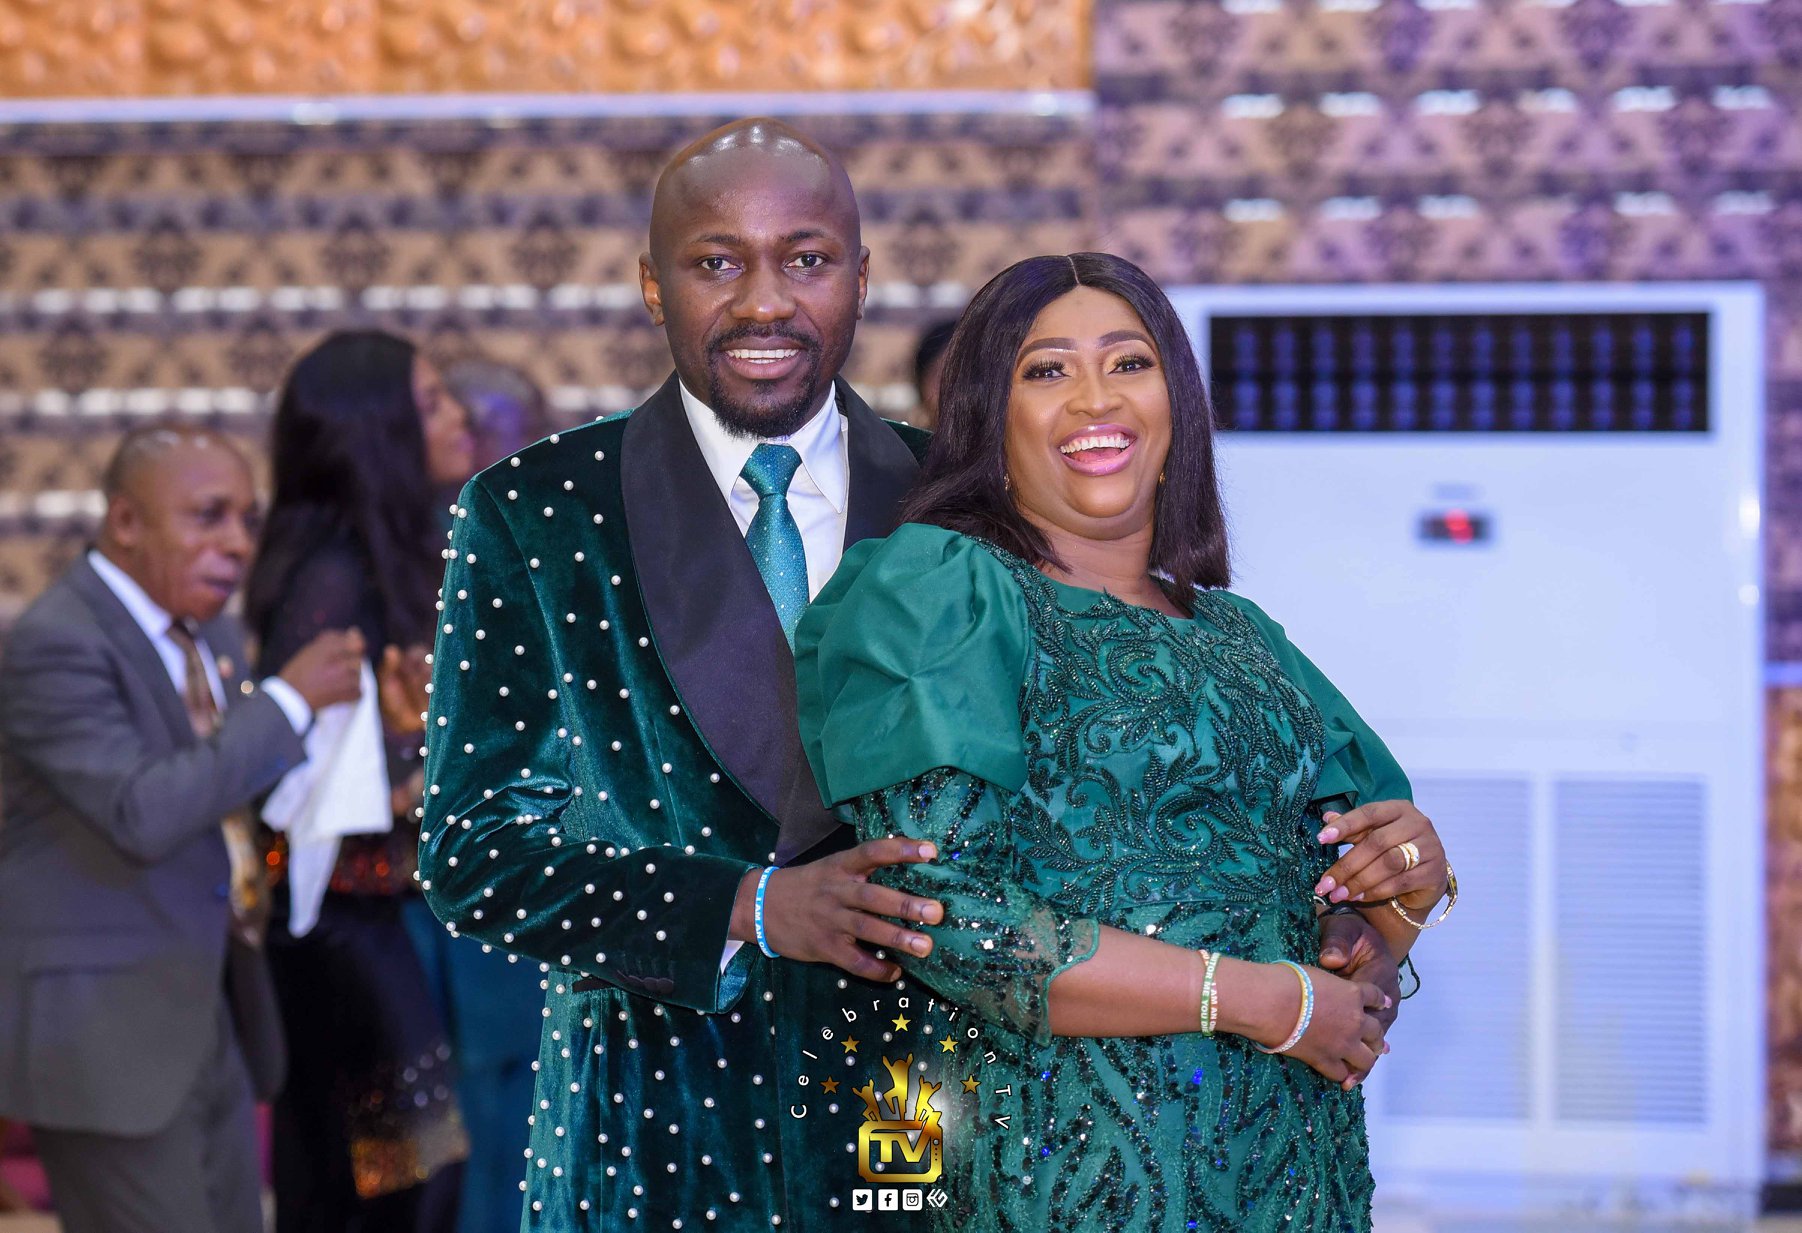 Apostle Suleman Celebrates 20 Years With His Wife